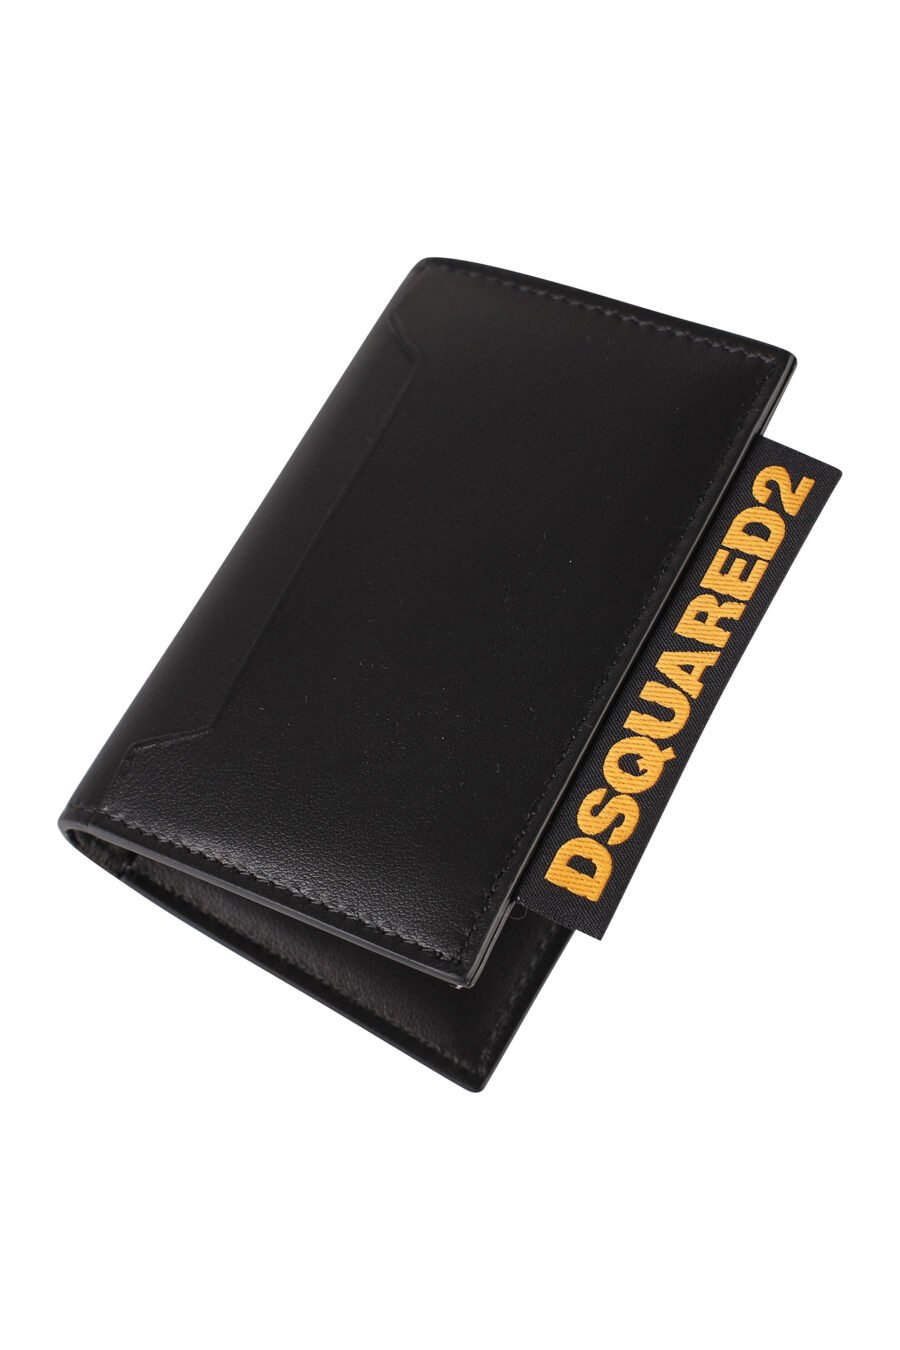 Black card holder with yellow label and logo - IMG 1275